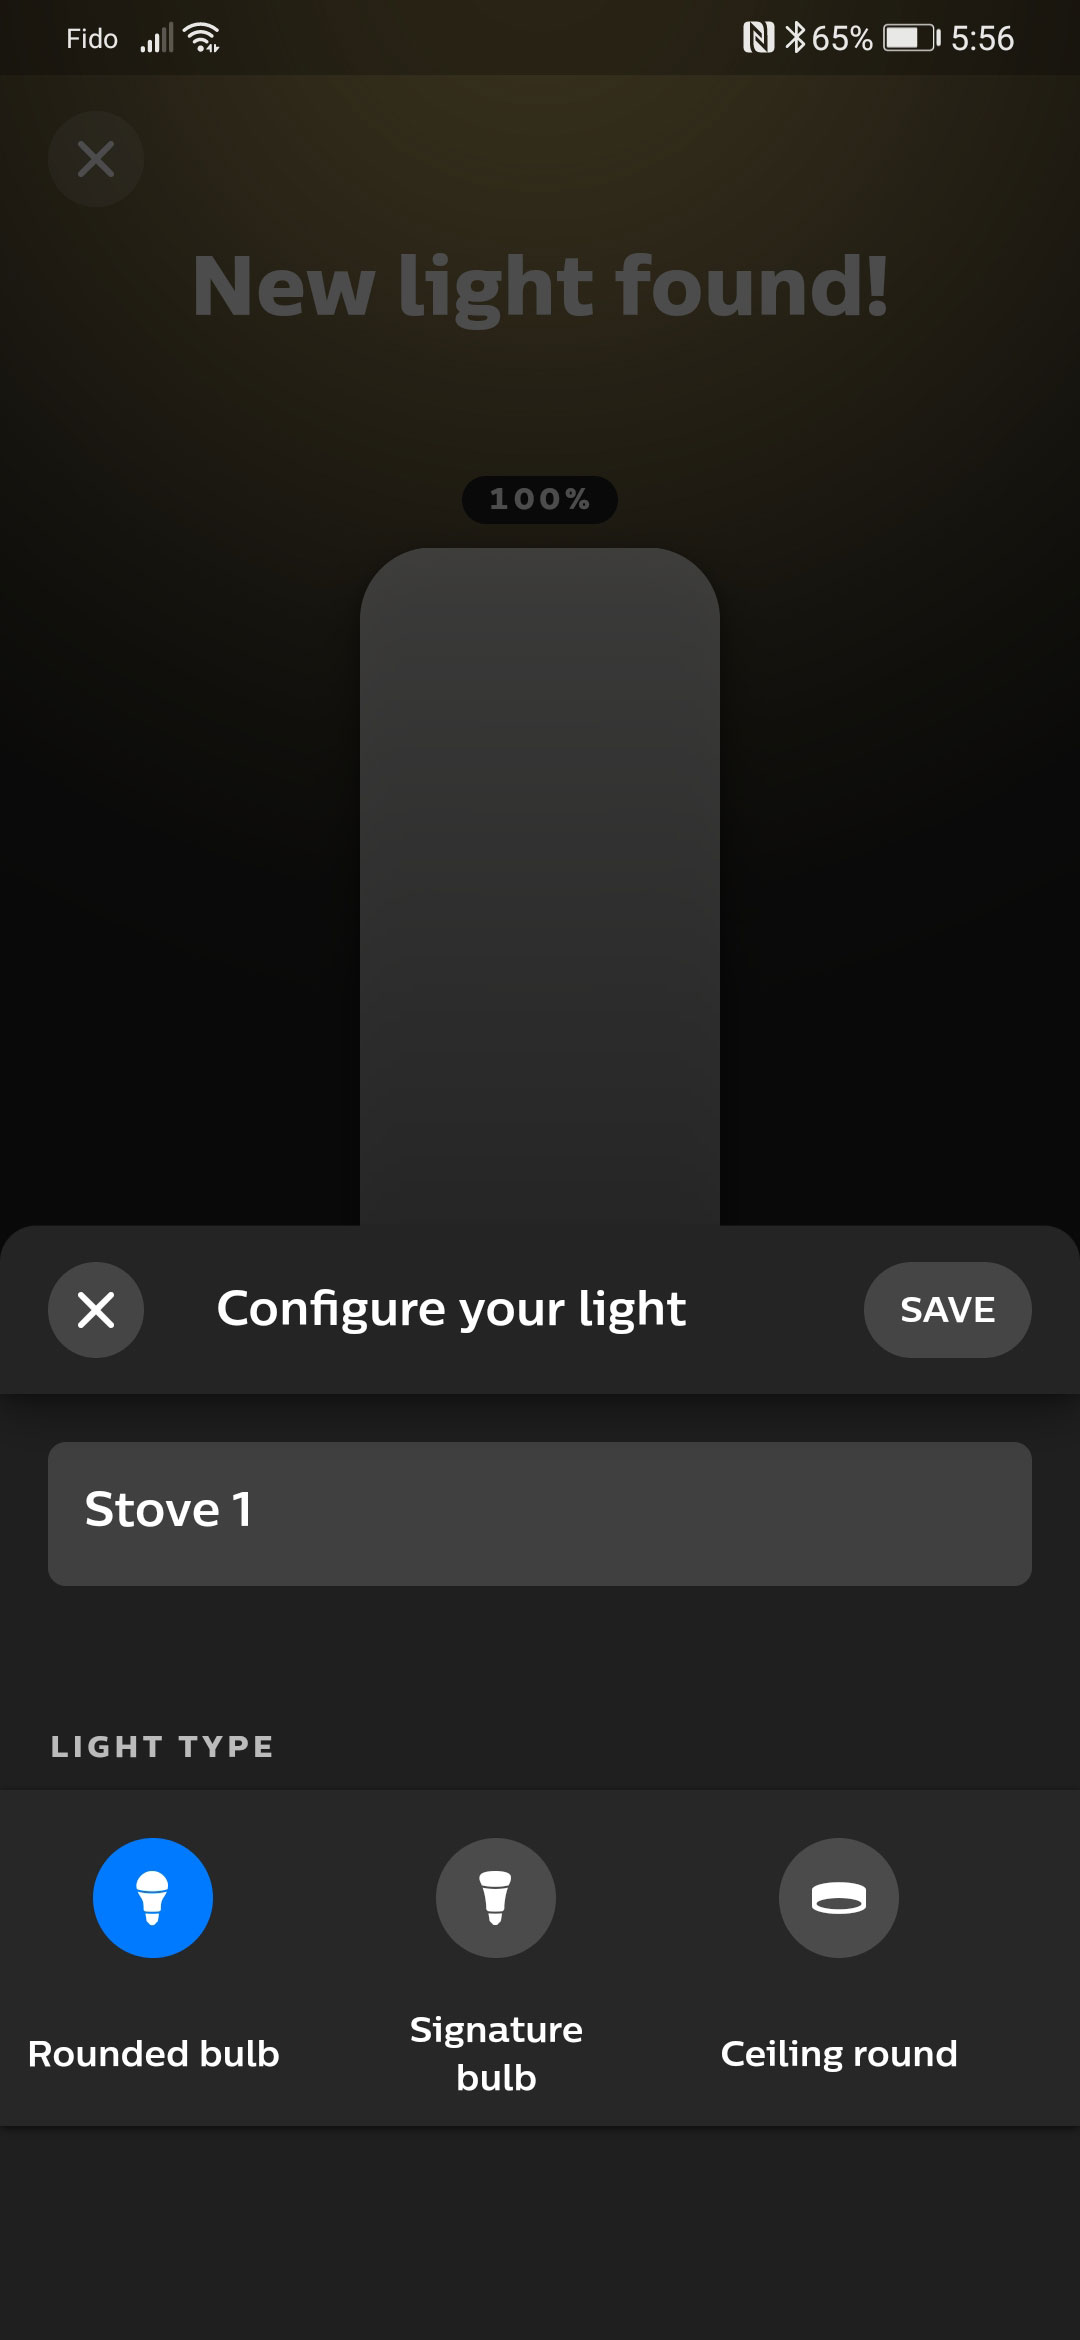 How to reset the screen on Philips Hue lights6